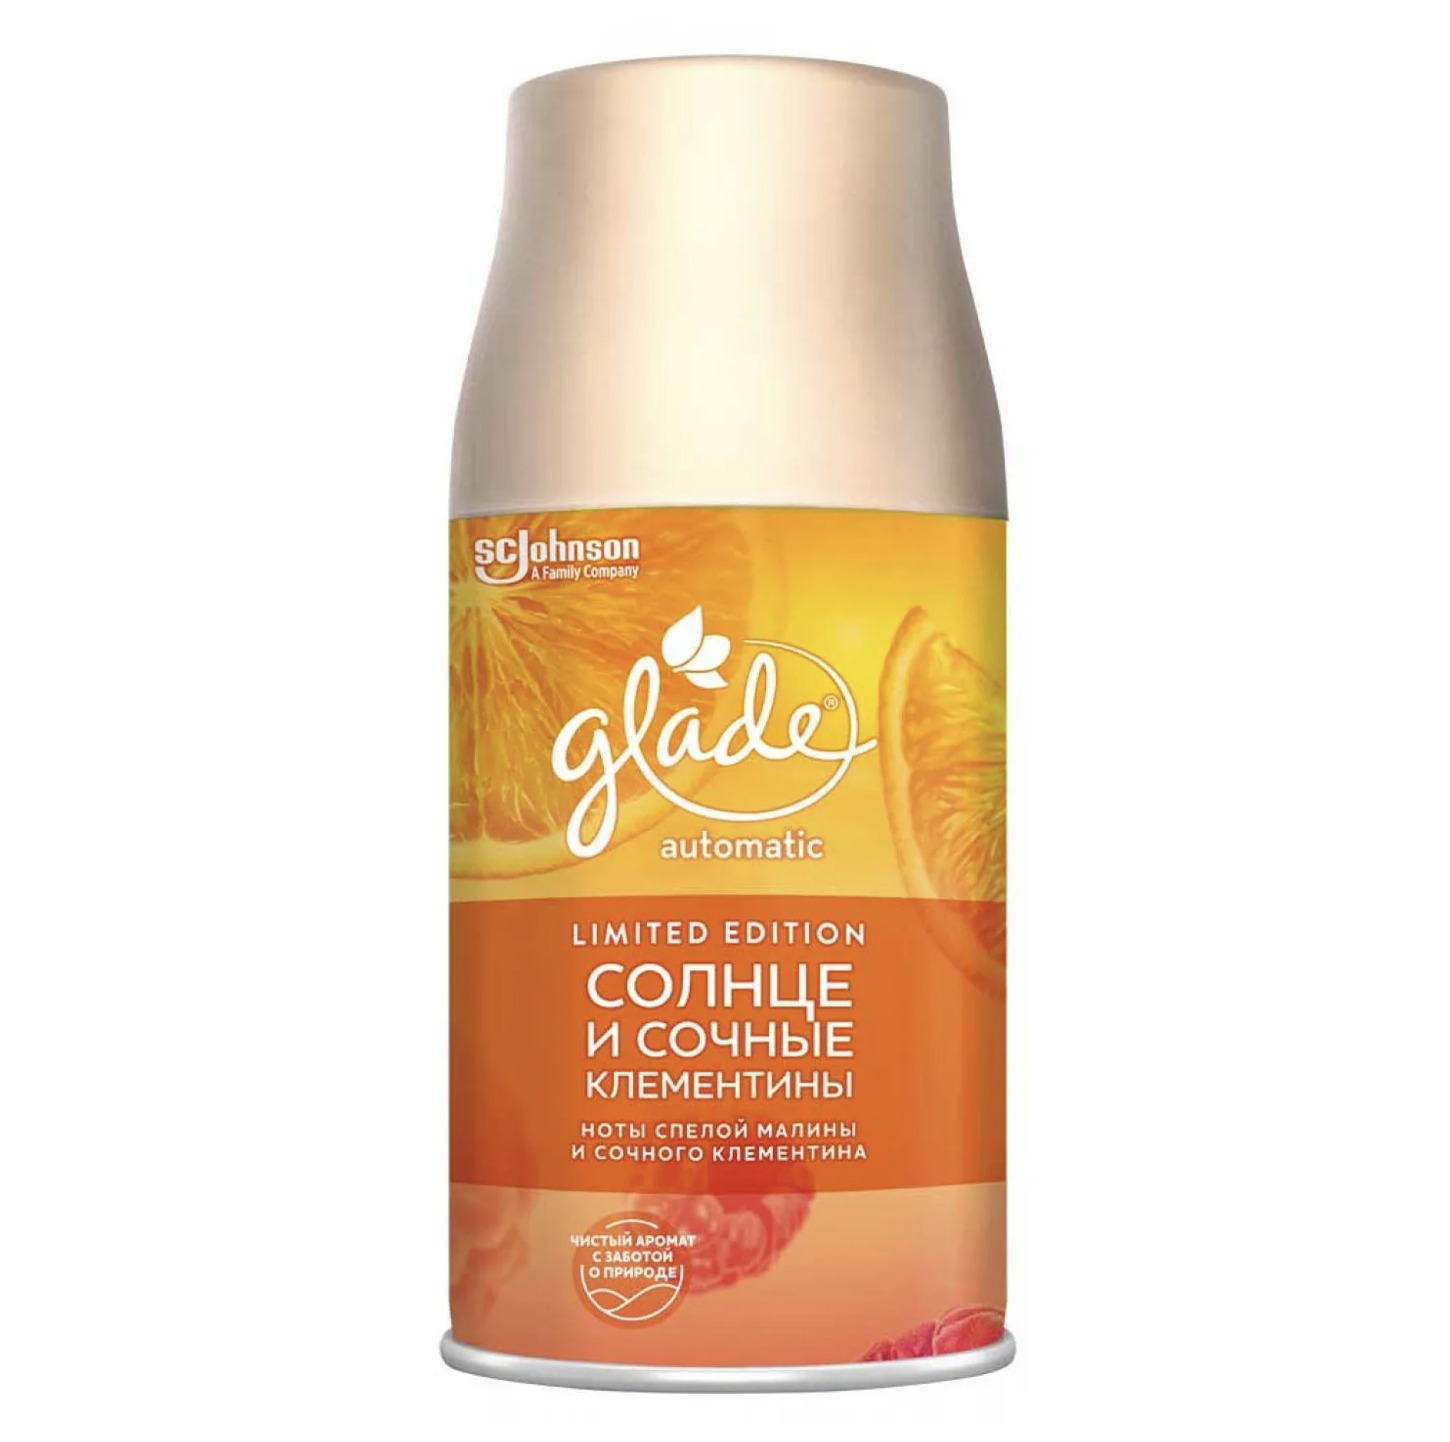   / Glade Automatic Limited Edition -      , 269 